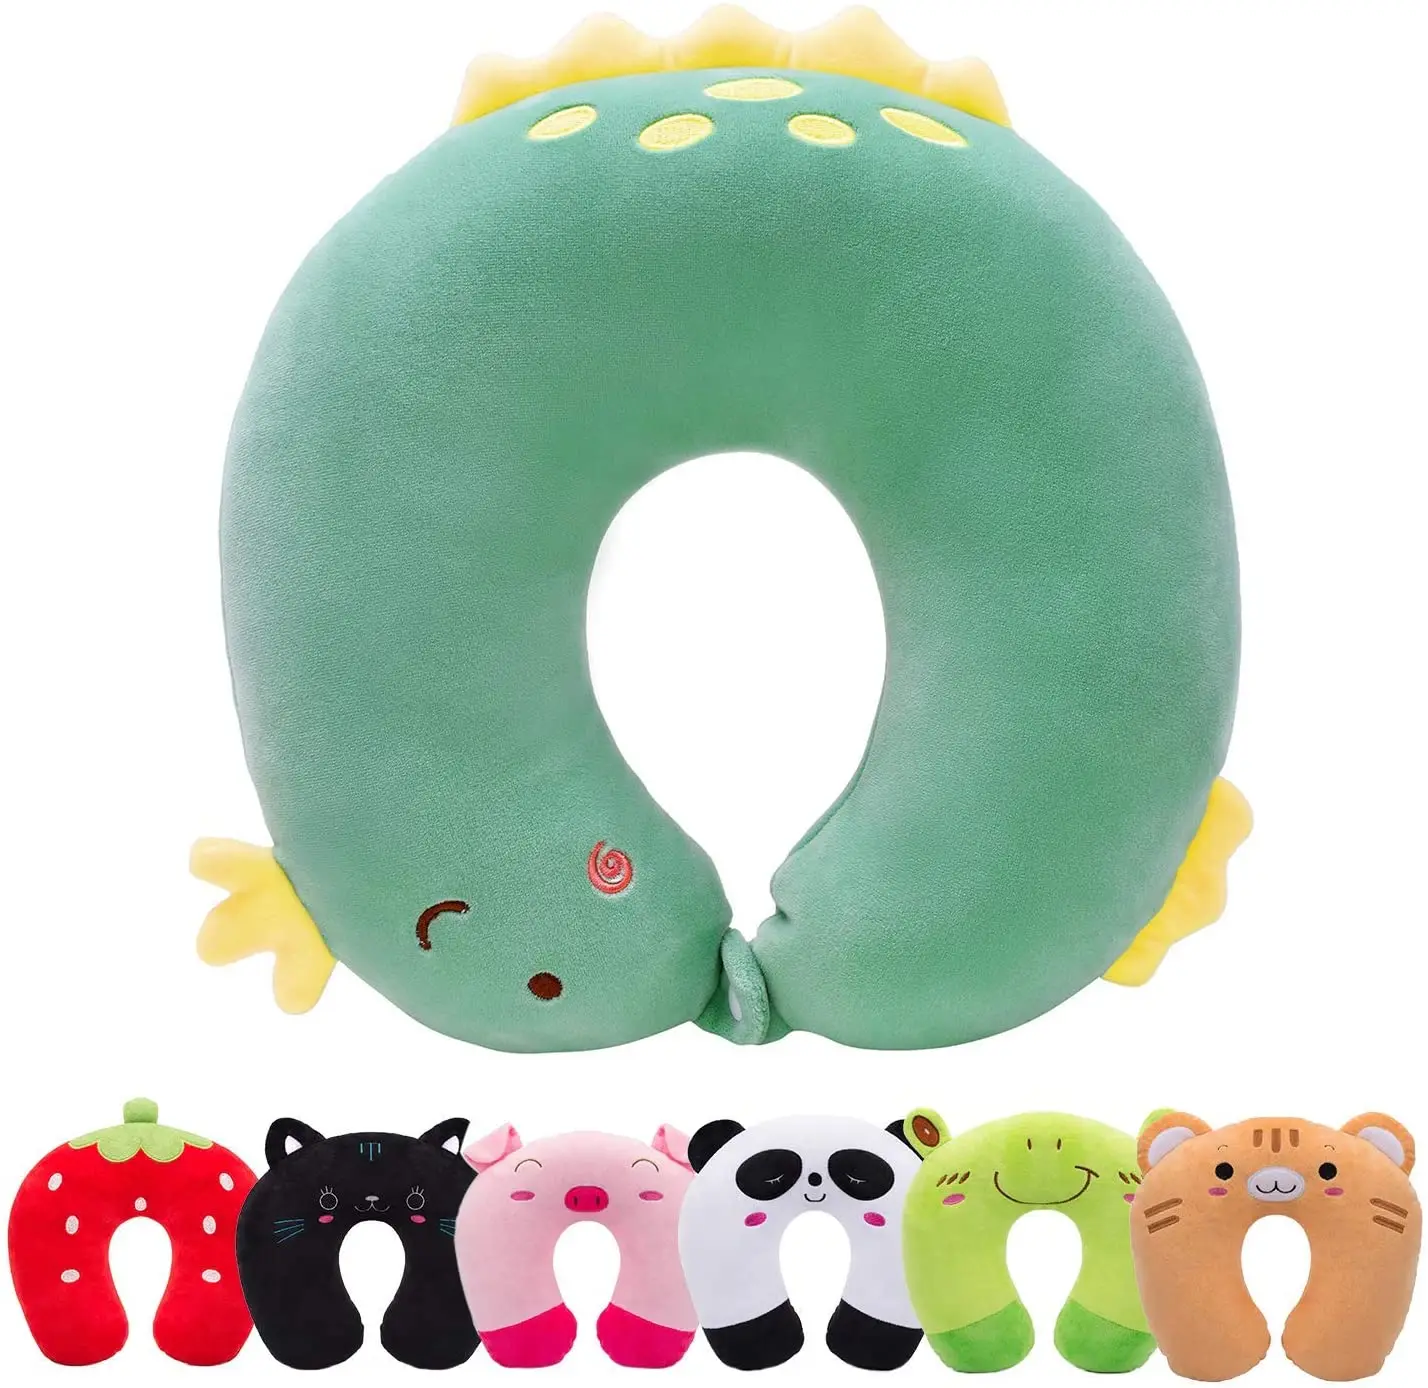 Travel Pillow For Kids Toddlers Soft Animal Cartoon U Shape Travel Neck  Pillow For Airplane Car Train Cute Children Gifts - Buy Cartoon Travel  Pillow,Travel Pillow For Kids,Kids Travel Pillow Product on